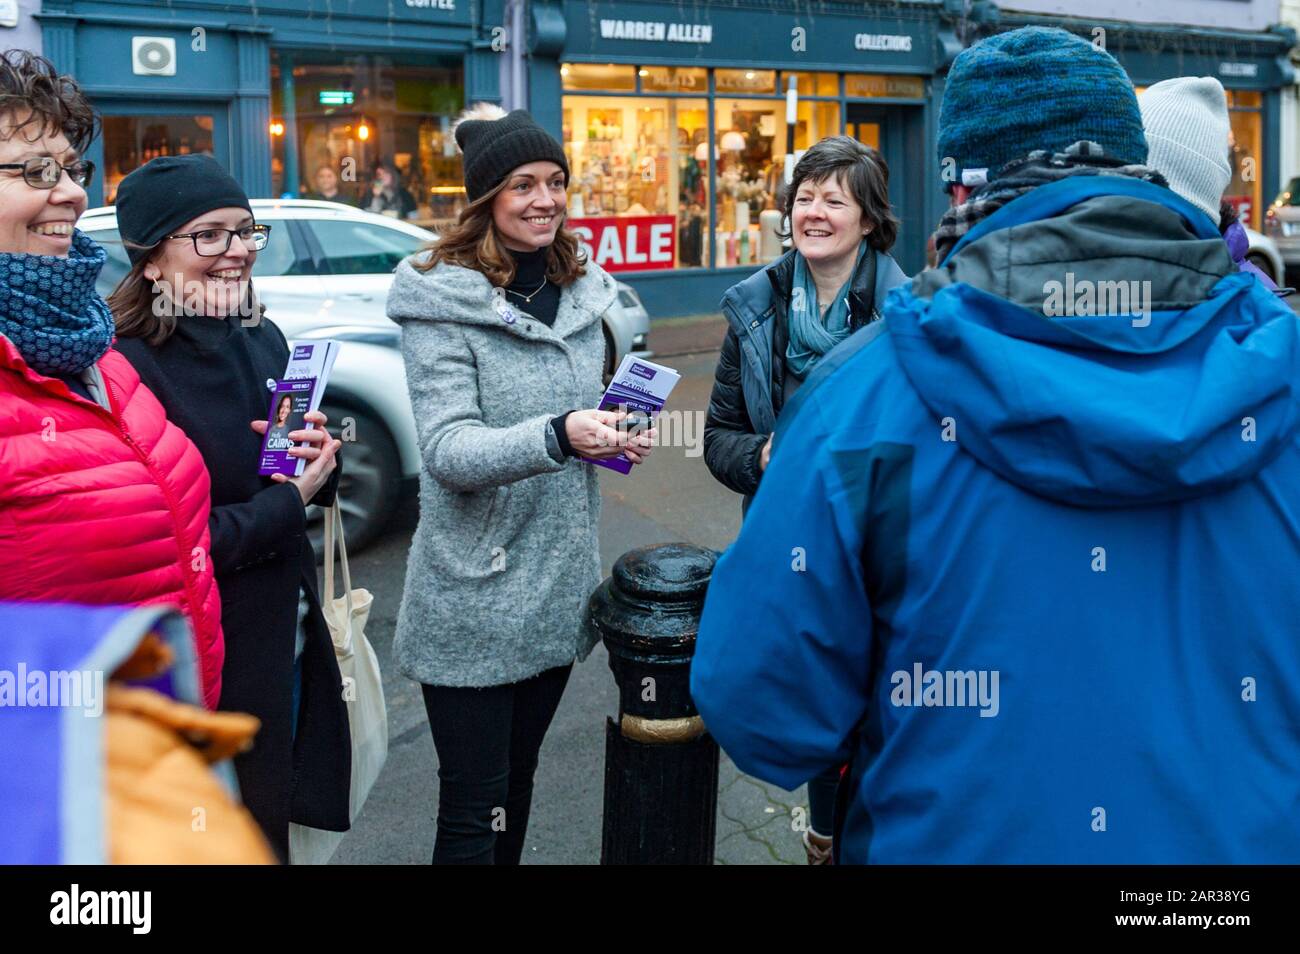 Bandon, West Cork, Ireland. 25th Jan, 2020. Election candidate Cllr. Holly Cairns (Social Democrats) and her team were out canvassing for votes in Bandon today.  Credit: Andy Gibson/Alamy Live News Stock Photo